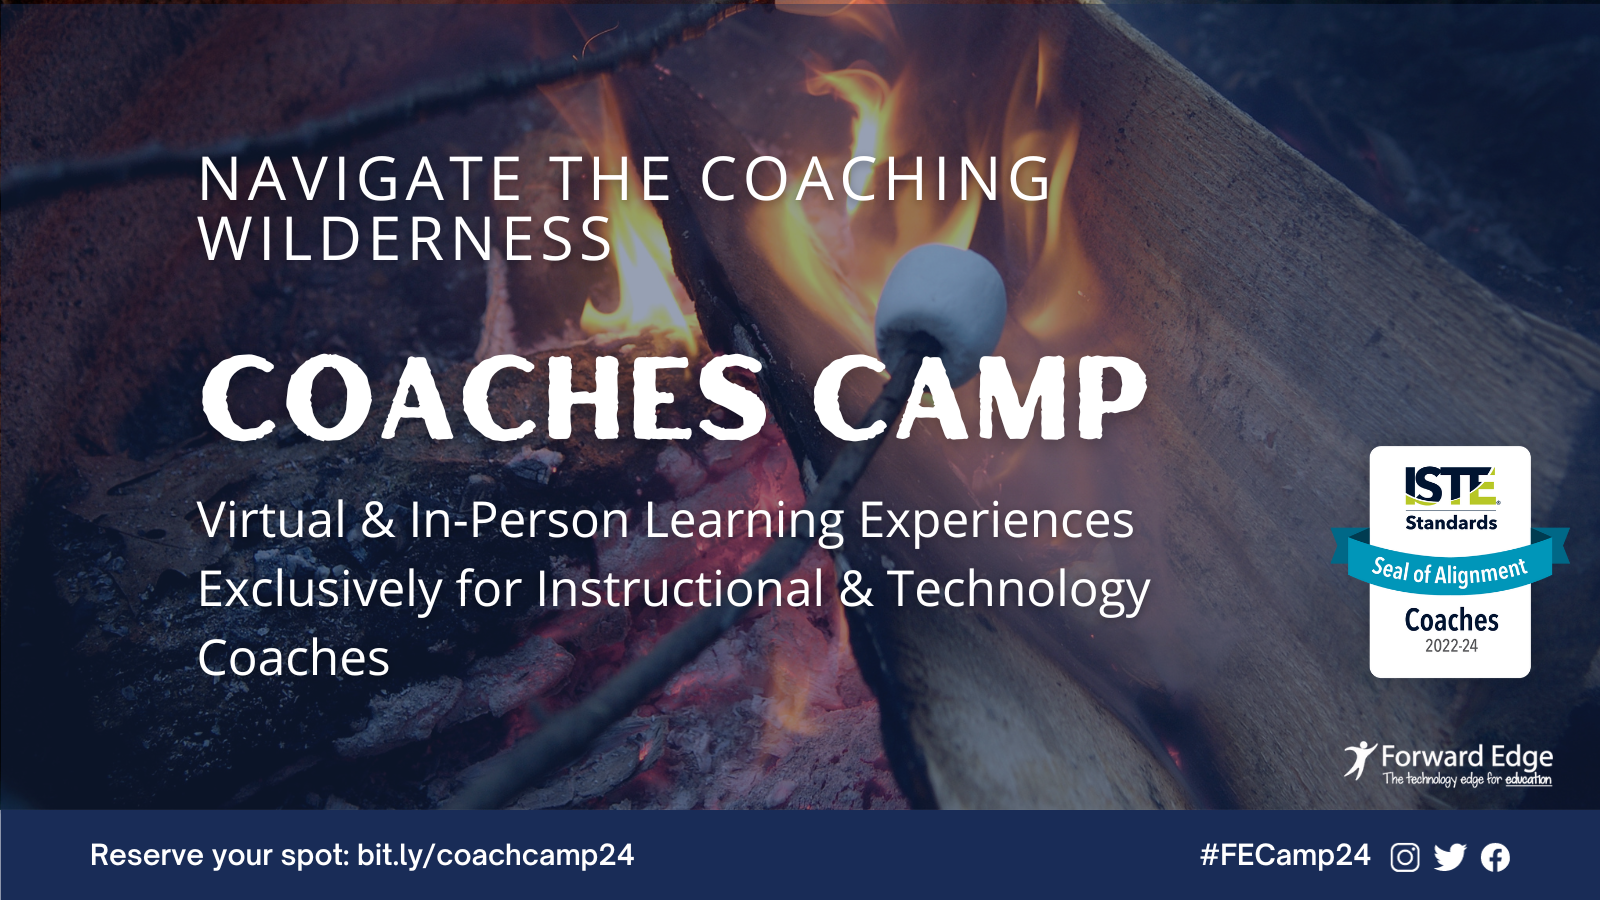 Image of campfire with text reading, "Navigate the Coaching Wilderness. Coaches Camp. Virtual & In Person Learning Experiences Exclusively for Instructional & Technology Coaches.